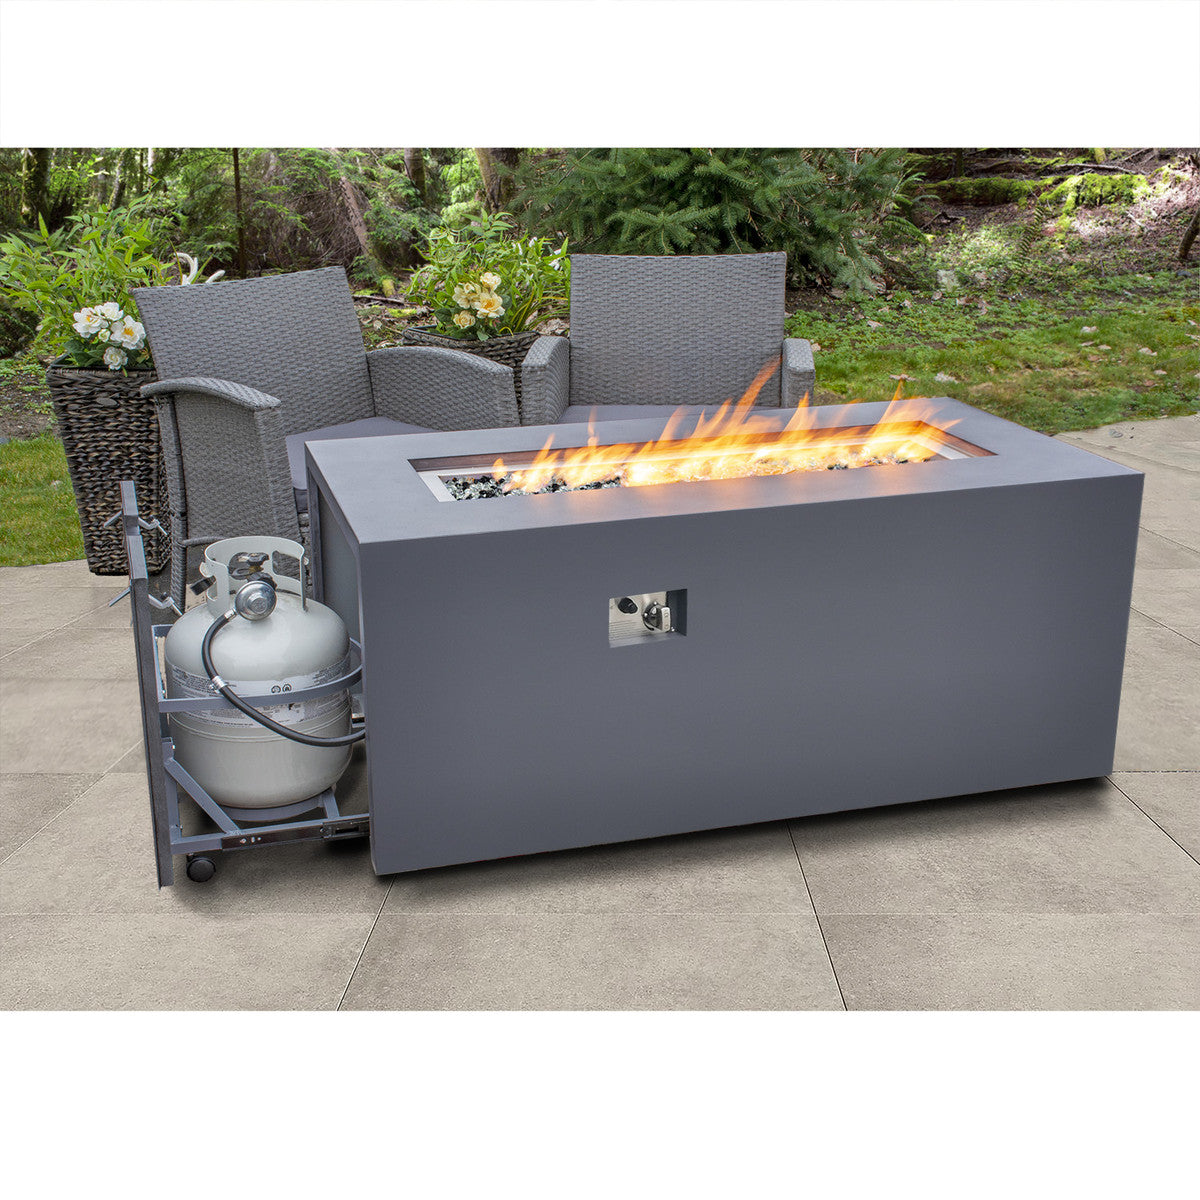 Paramount 49" Concrete Look Aluminum Fire Table, Tall Rectangle